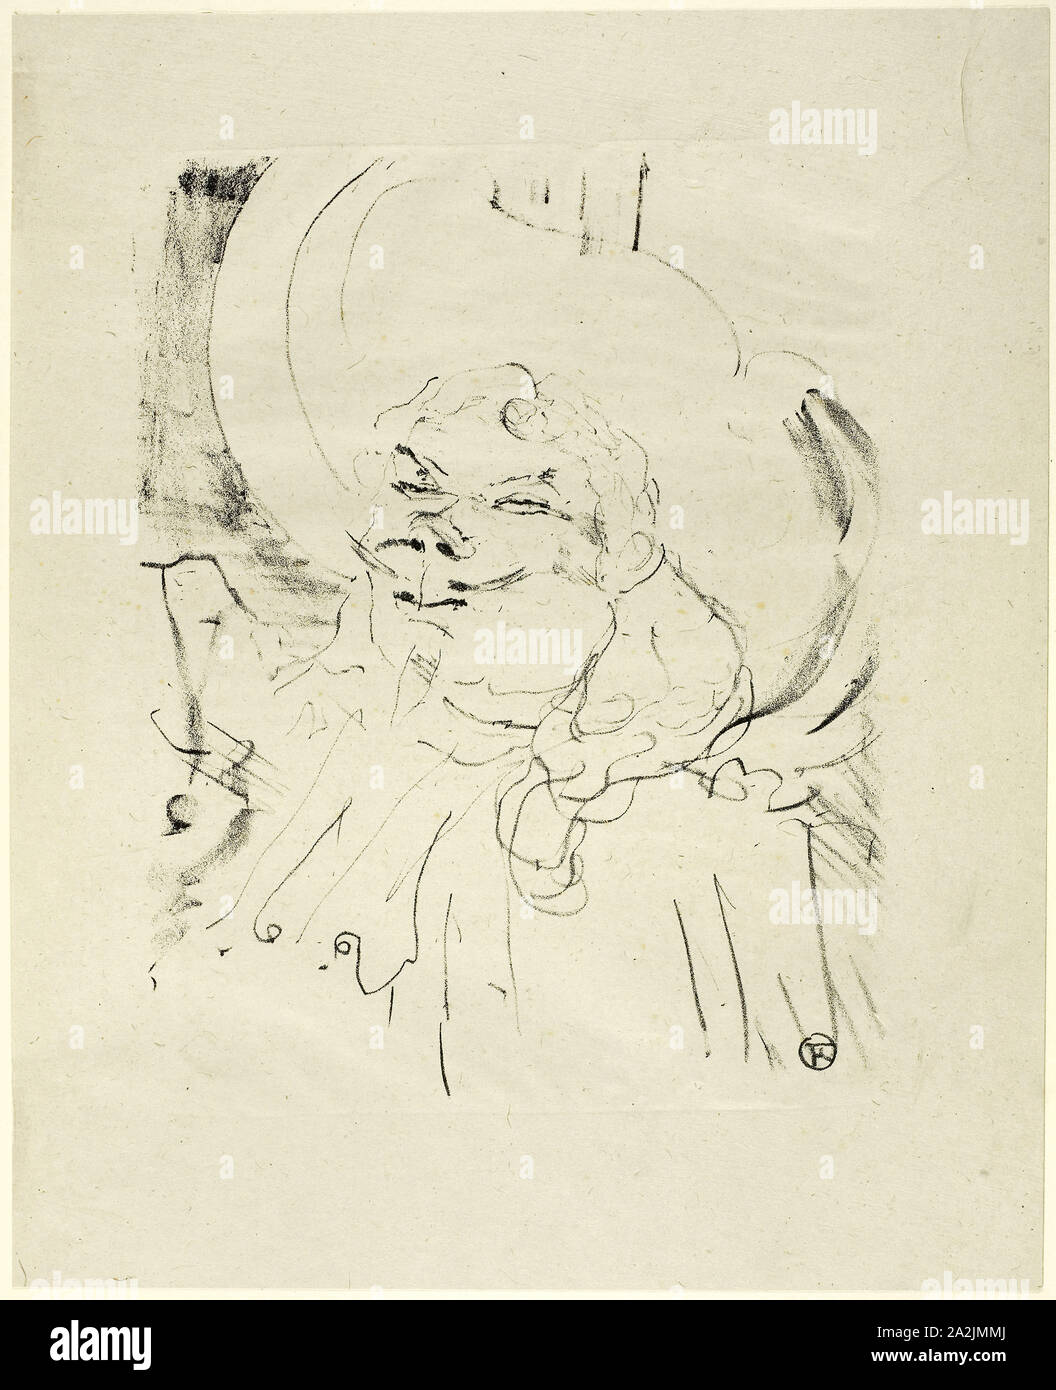 Coquelin the Elder, from Treize Lithographies, 1898, published before 1906, Henri de Toulouse-Lautrec, French, 1864-1901, France, Lithograph on ivory laid paper, 287 × 229 mm (image), 391 × 316 mm (sheet Stock Photo